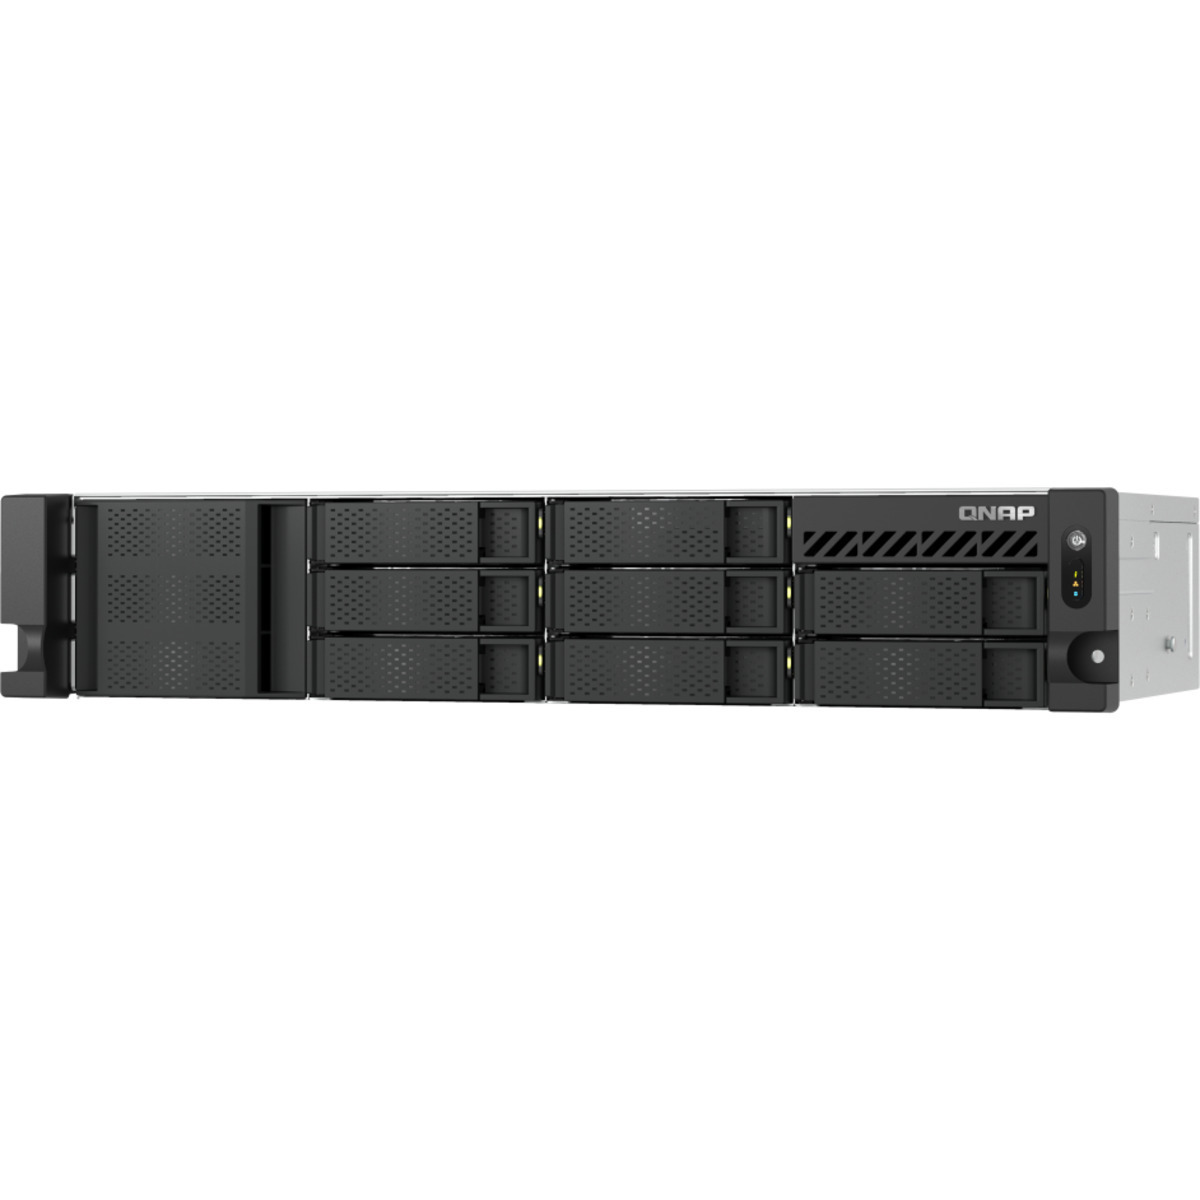 QNAP TS-855eU 70tb 8-Bay RackMount Multimedia / Power User / Business NAS - Network Attached Storage Device 7x10tb Western Digital Red Pro WD102KFBX 3.5 7200rpm SATA 6Gb/s HDD NAS Class Drives Installed - Burn-In Tested - FREE RAM UPGRADE TS-855eU